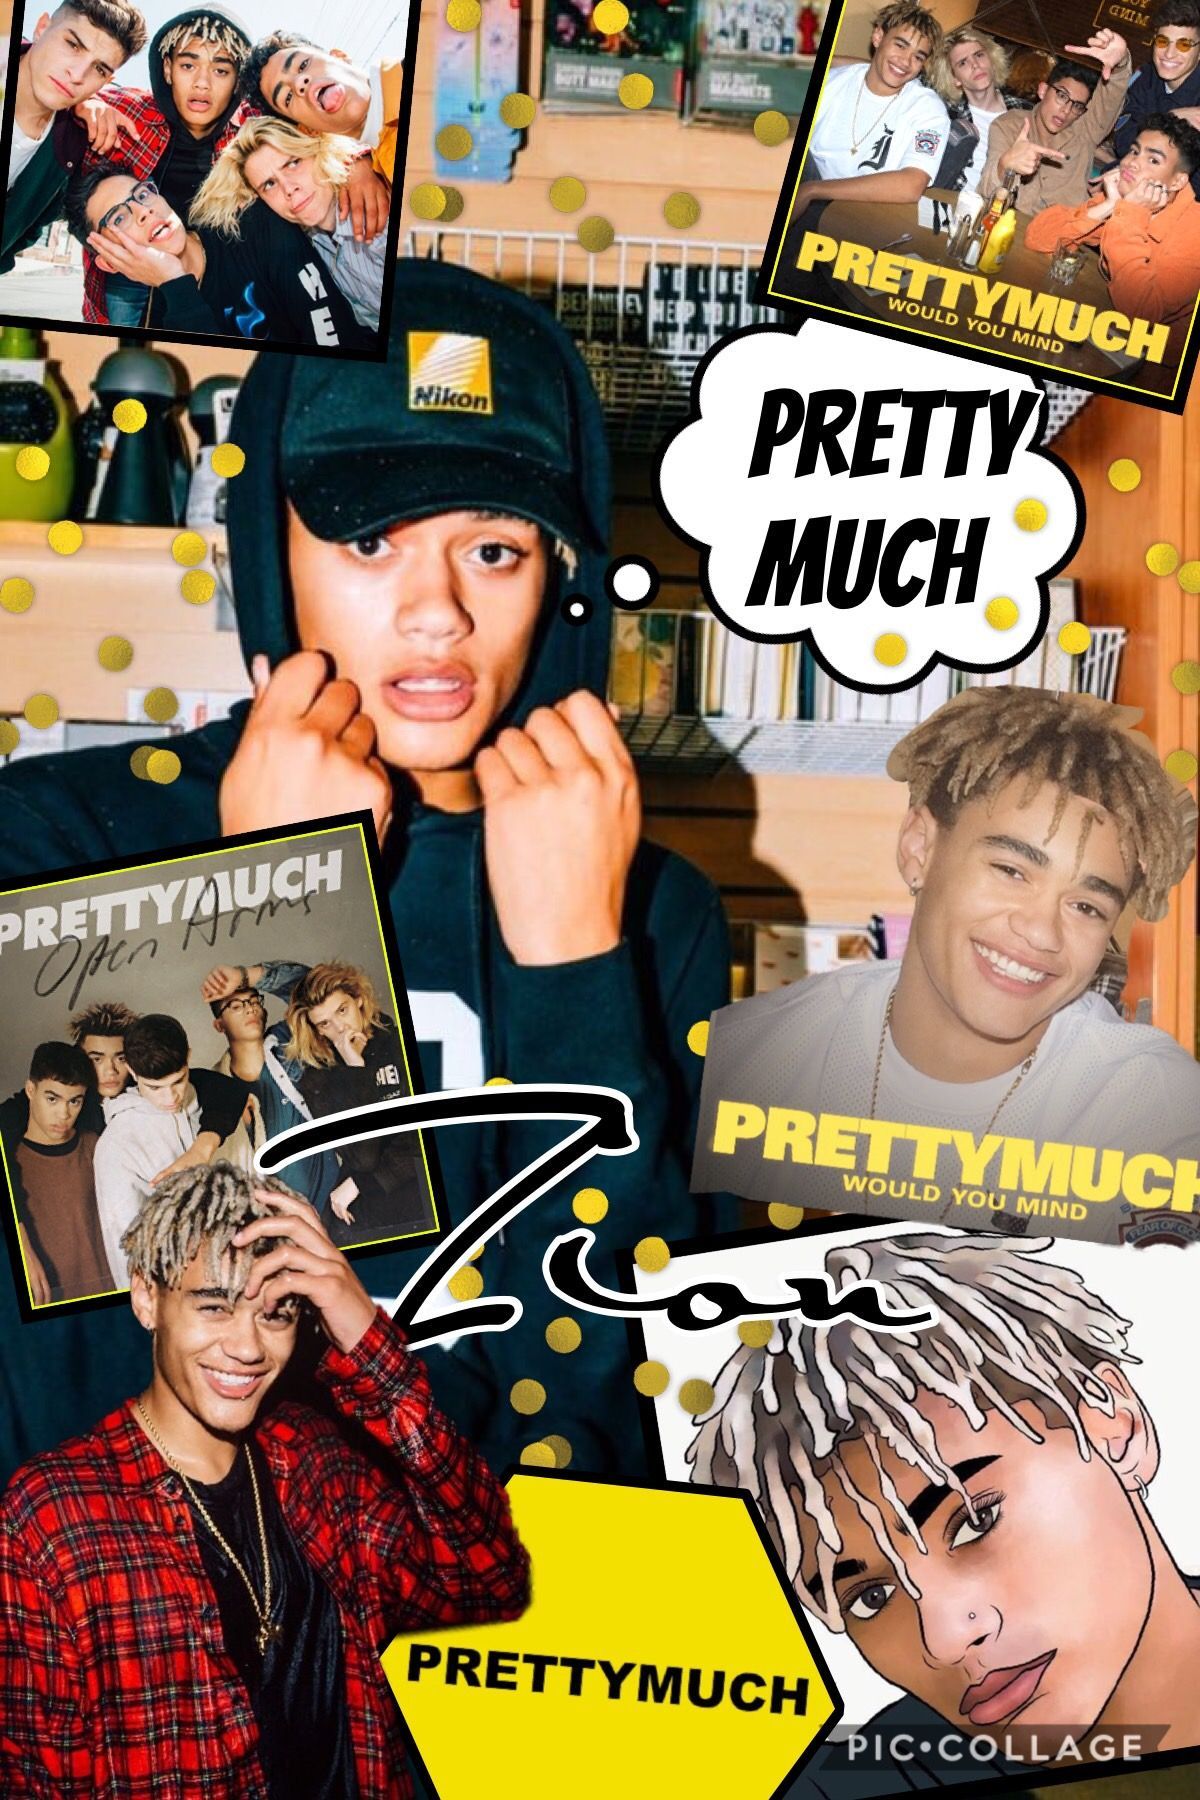 PRETTYMUCH Zion ❤️❤️ made by yours truly. Pretty much band